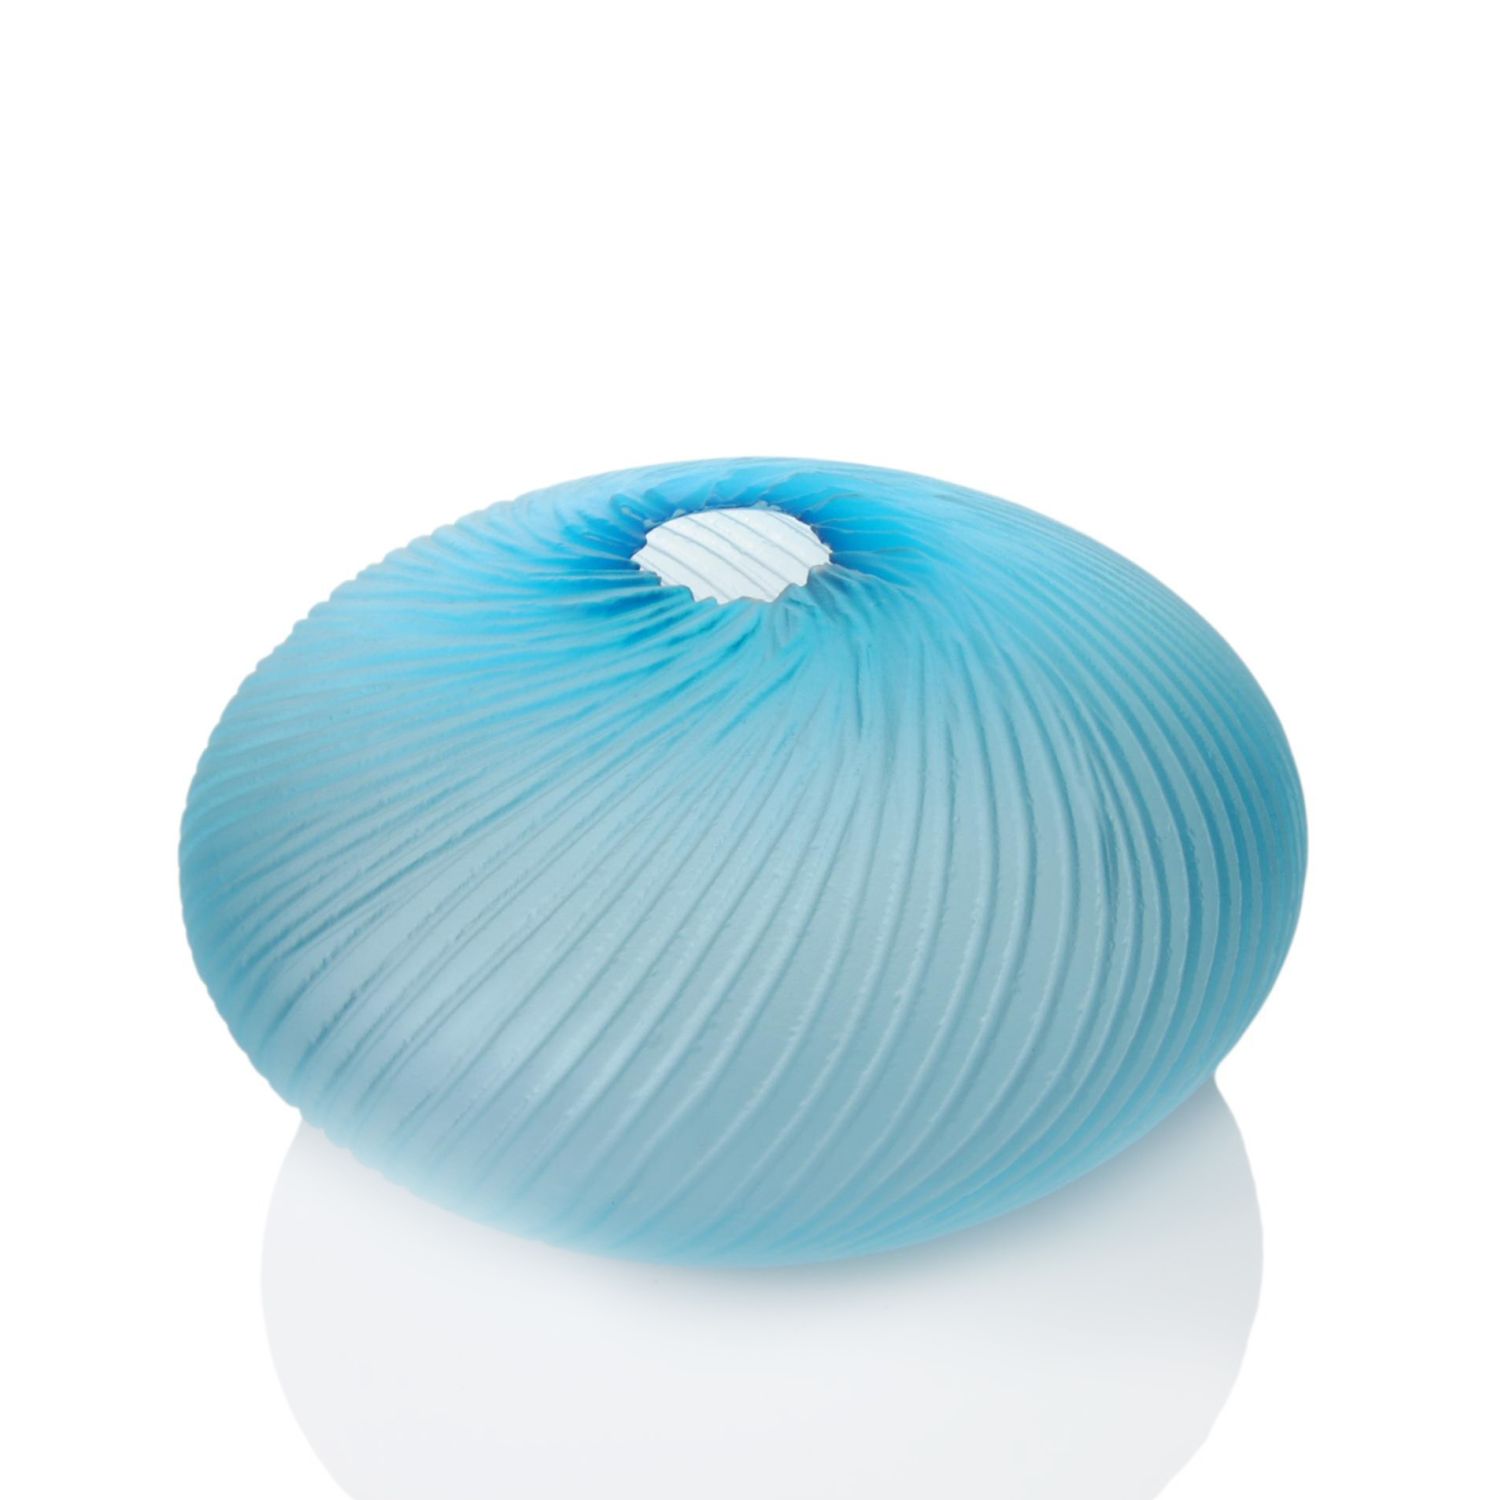 Courtney Downman: Aqua Saw Carved Glass Wave Bowl Product Image 1 of 1